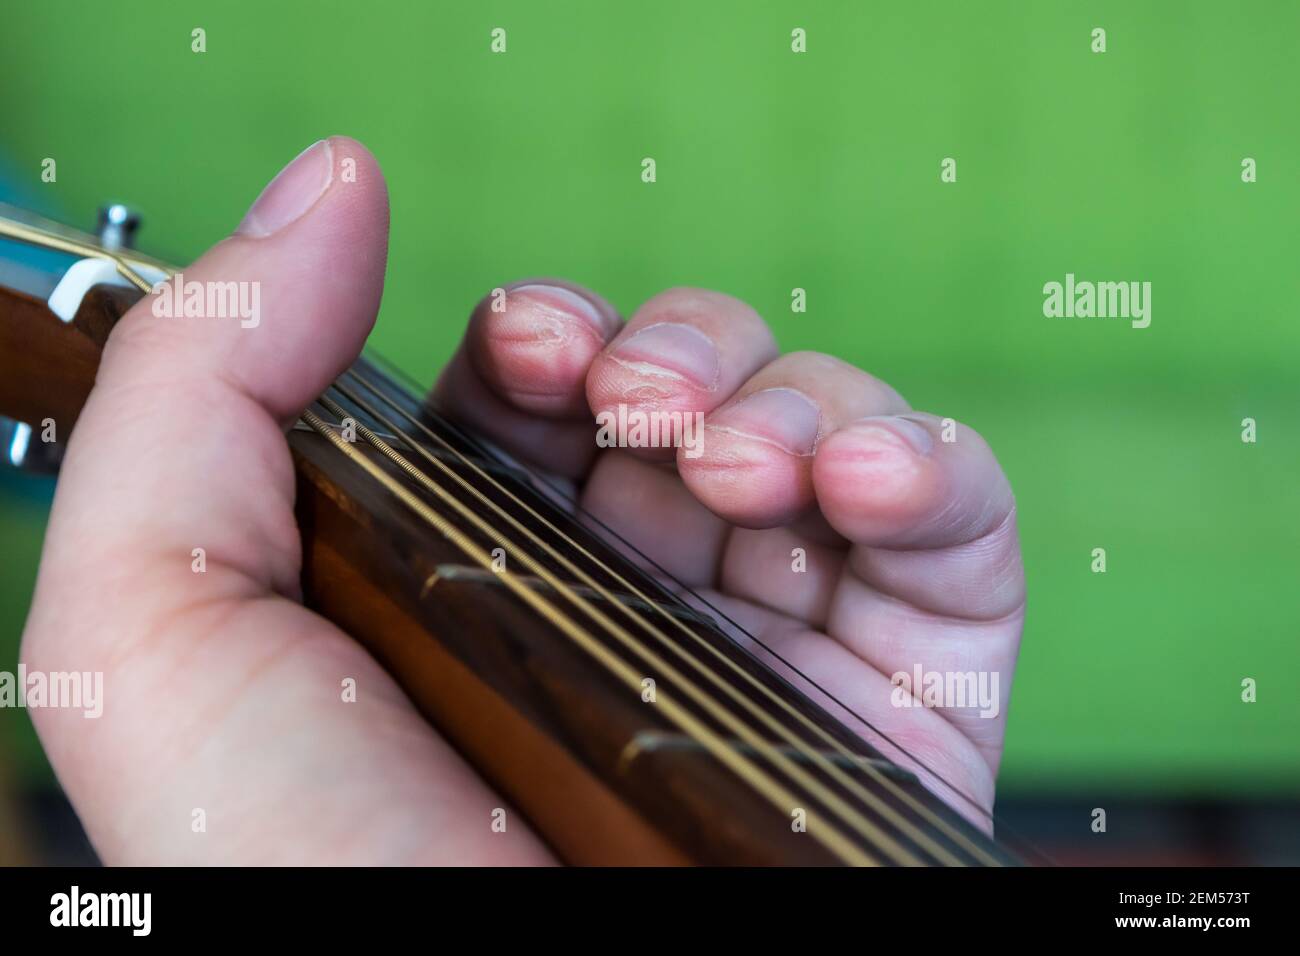 Guitarist fingers calluses with acoustic guitar fretboard Stock Photo